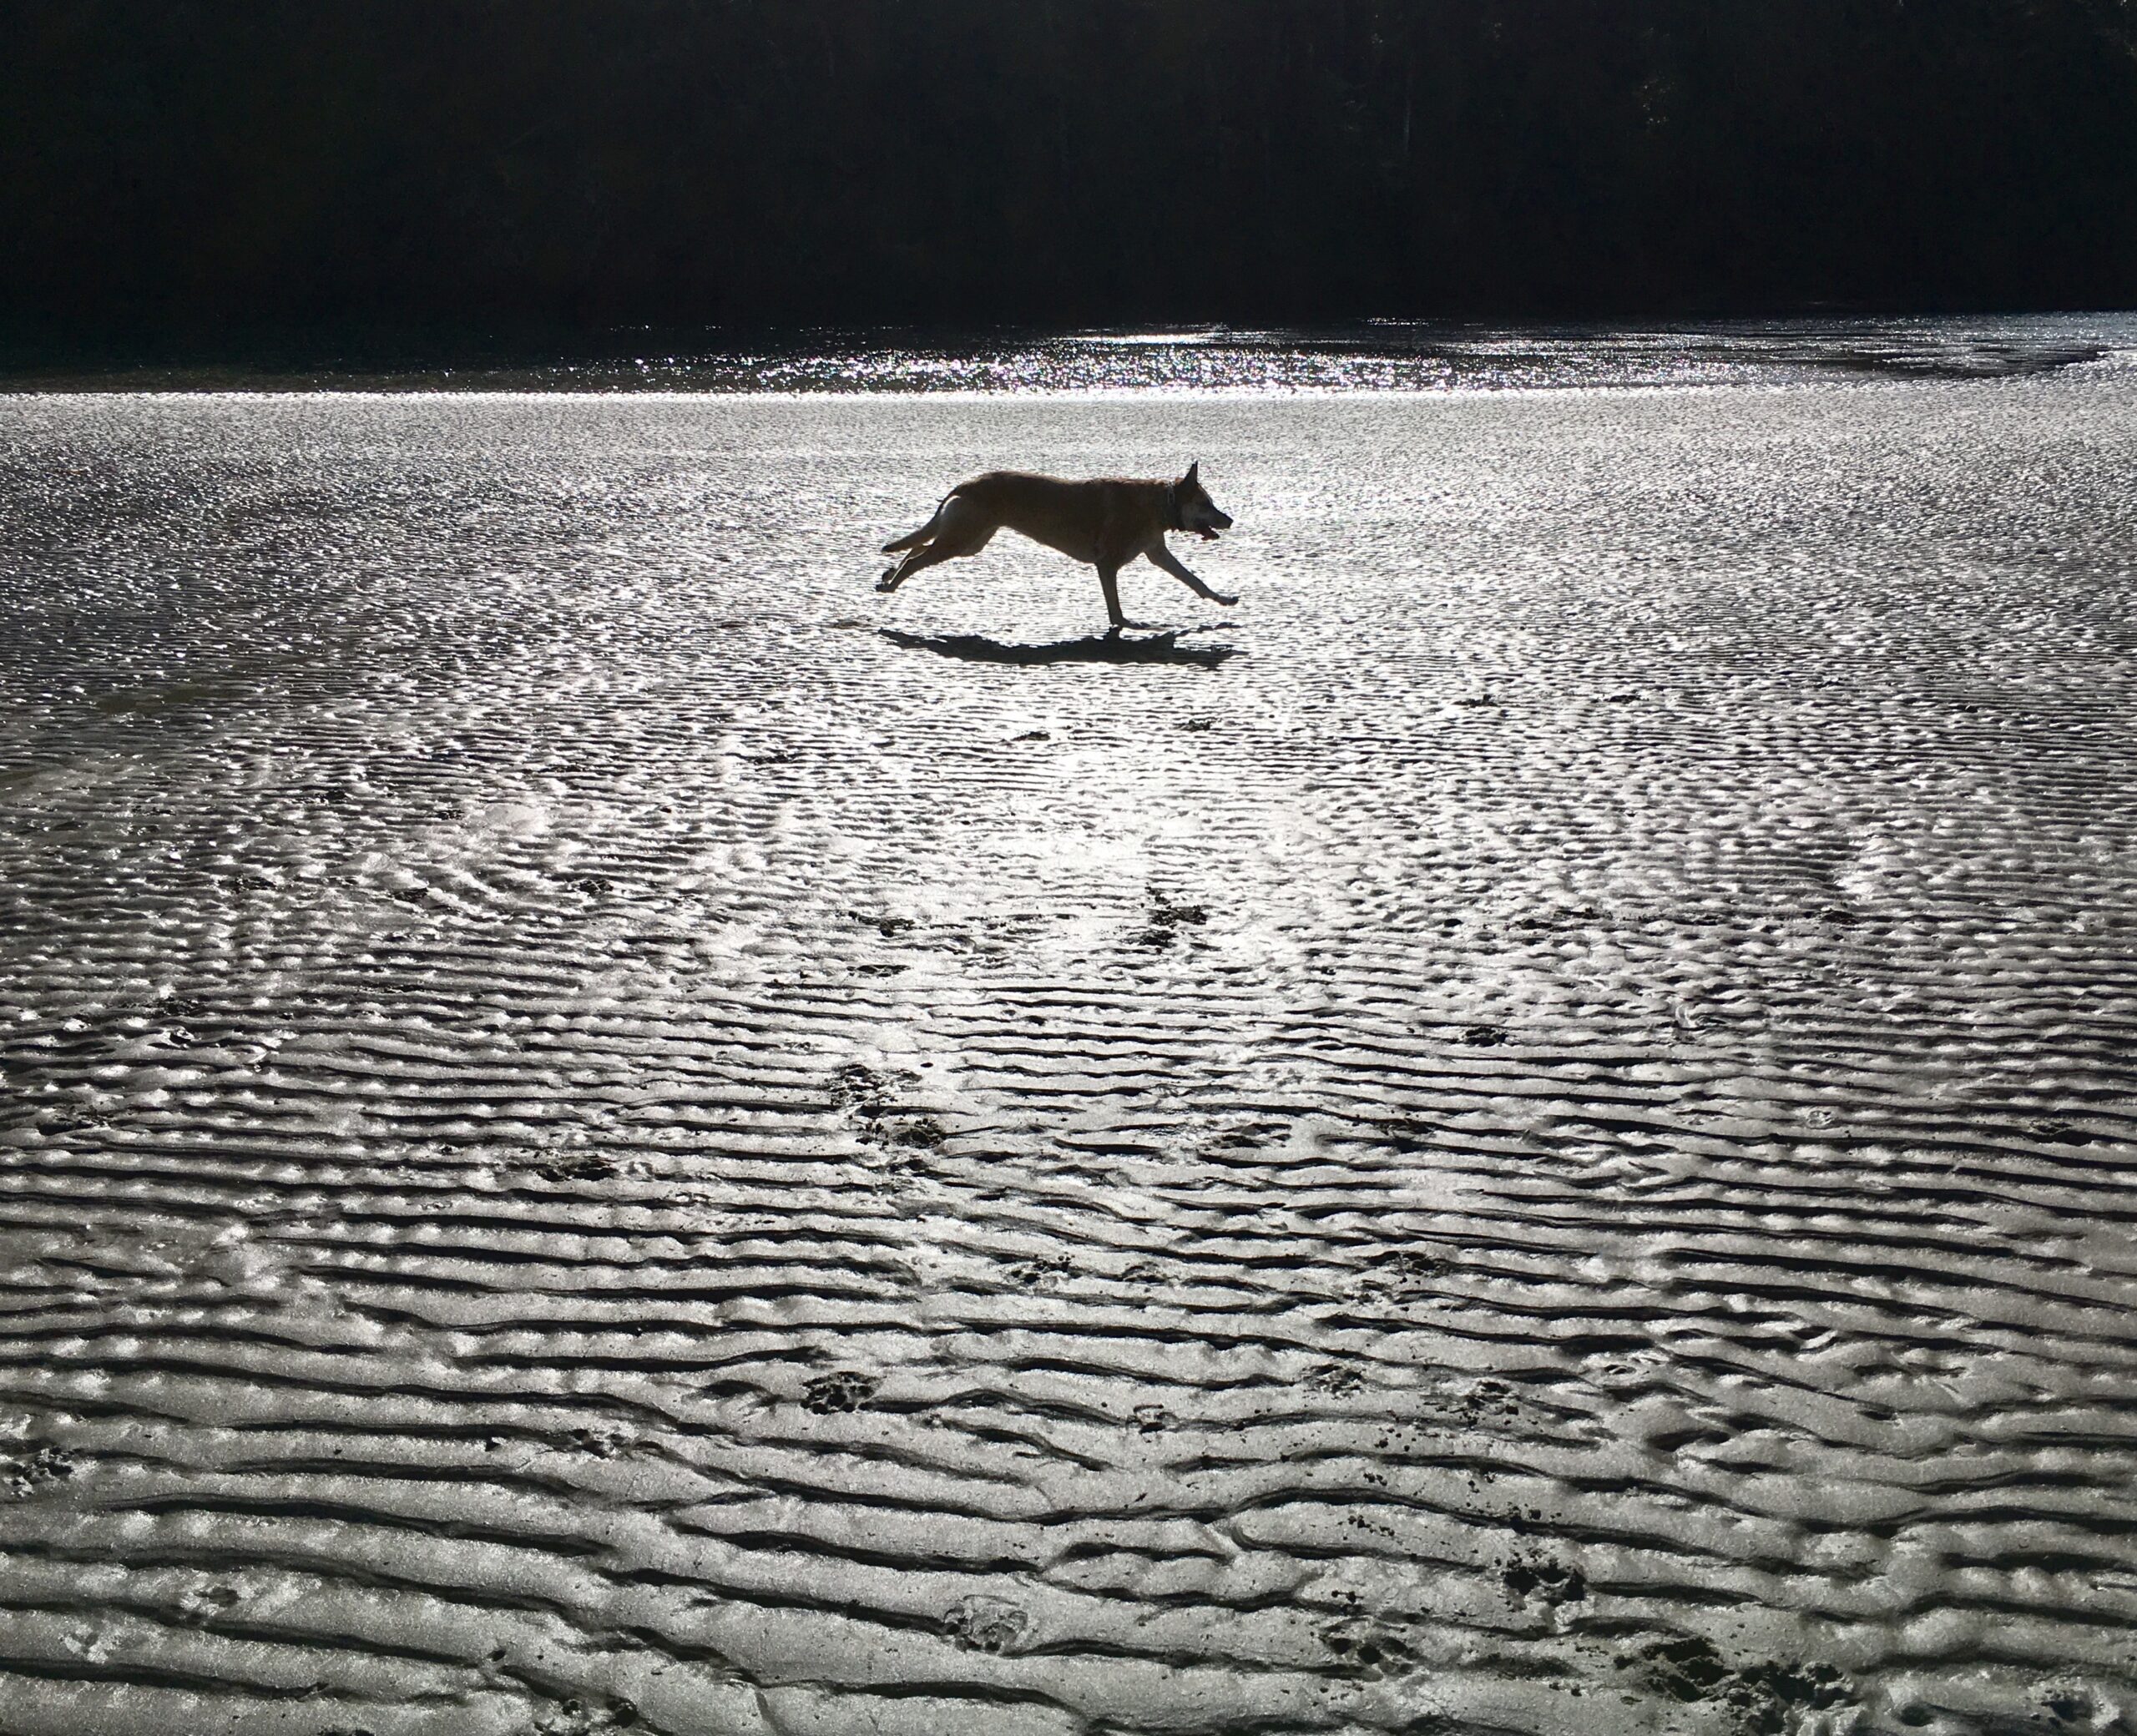 A dog running in the sand on a beach.